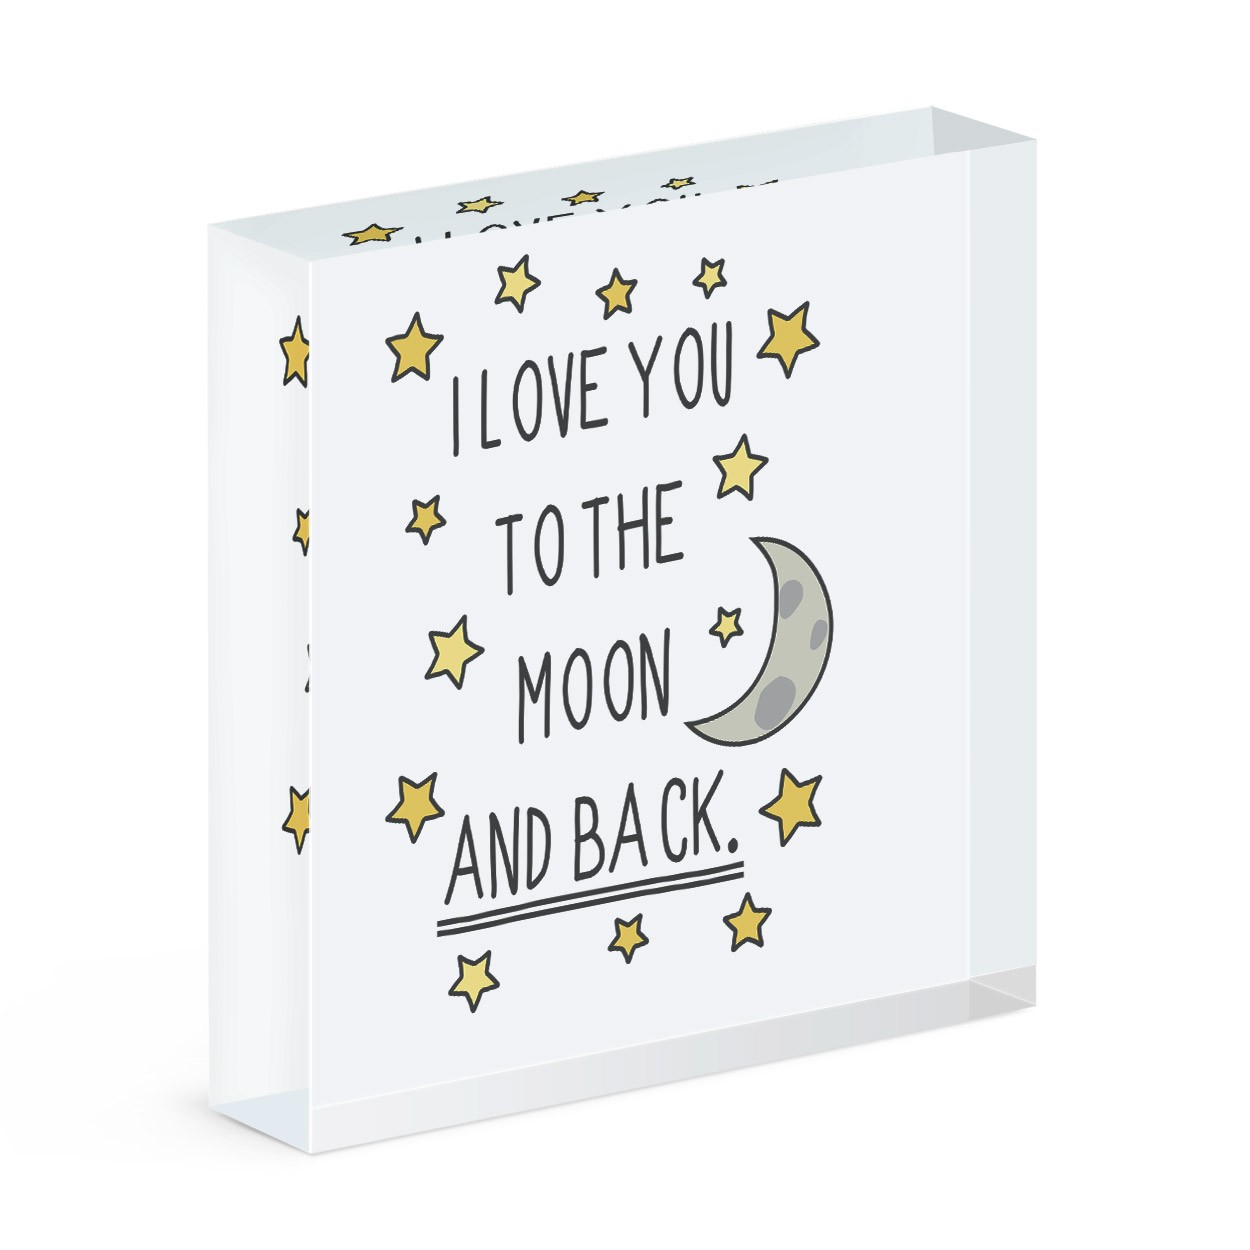 I Love You To The Moon And Back Acrylic Block